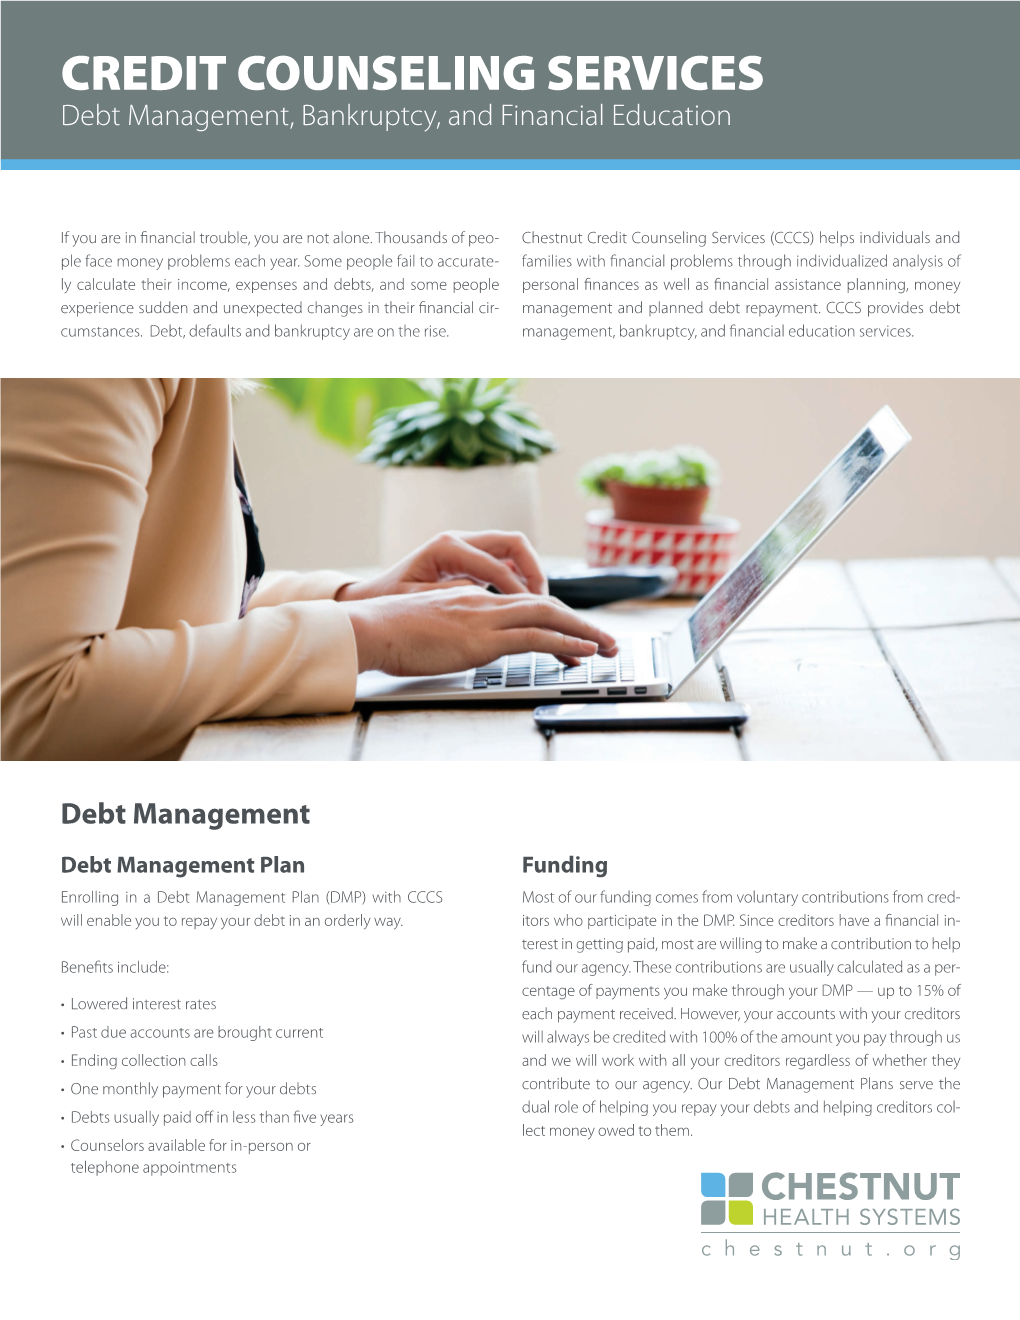 CREDIT COUNSELING SERVICES Debt Management, Bankruptcy, and Financial Education